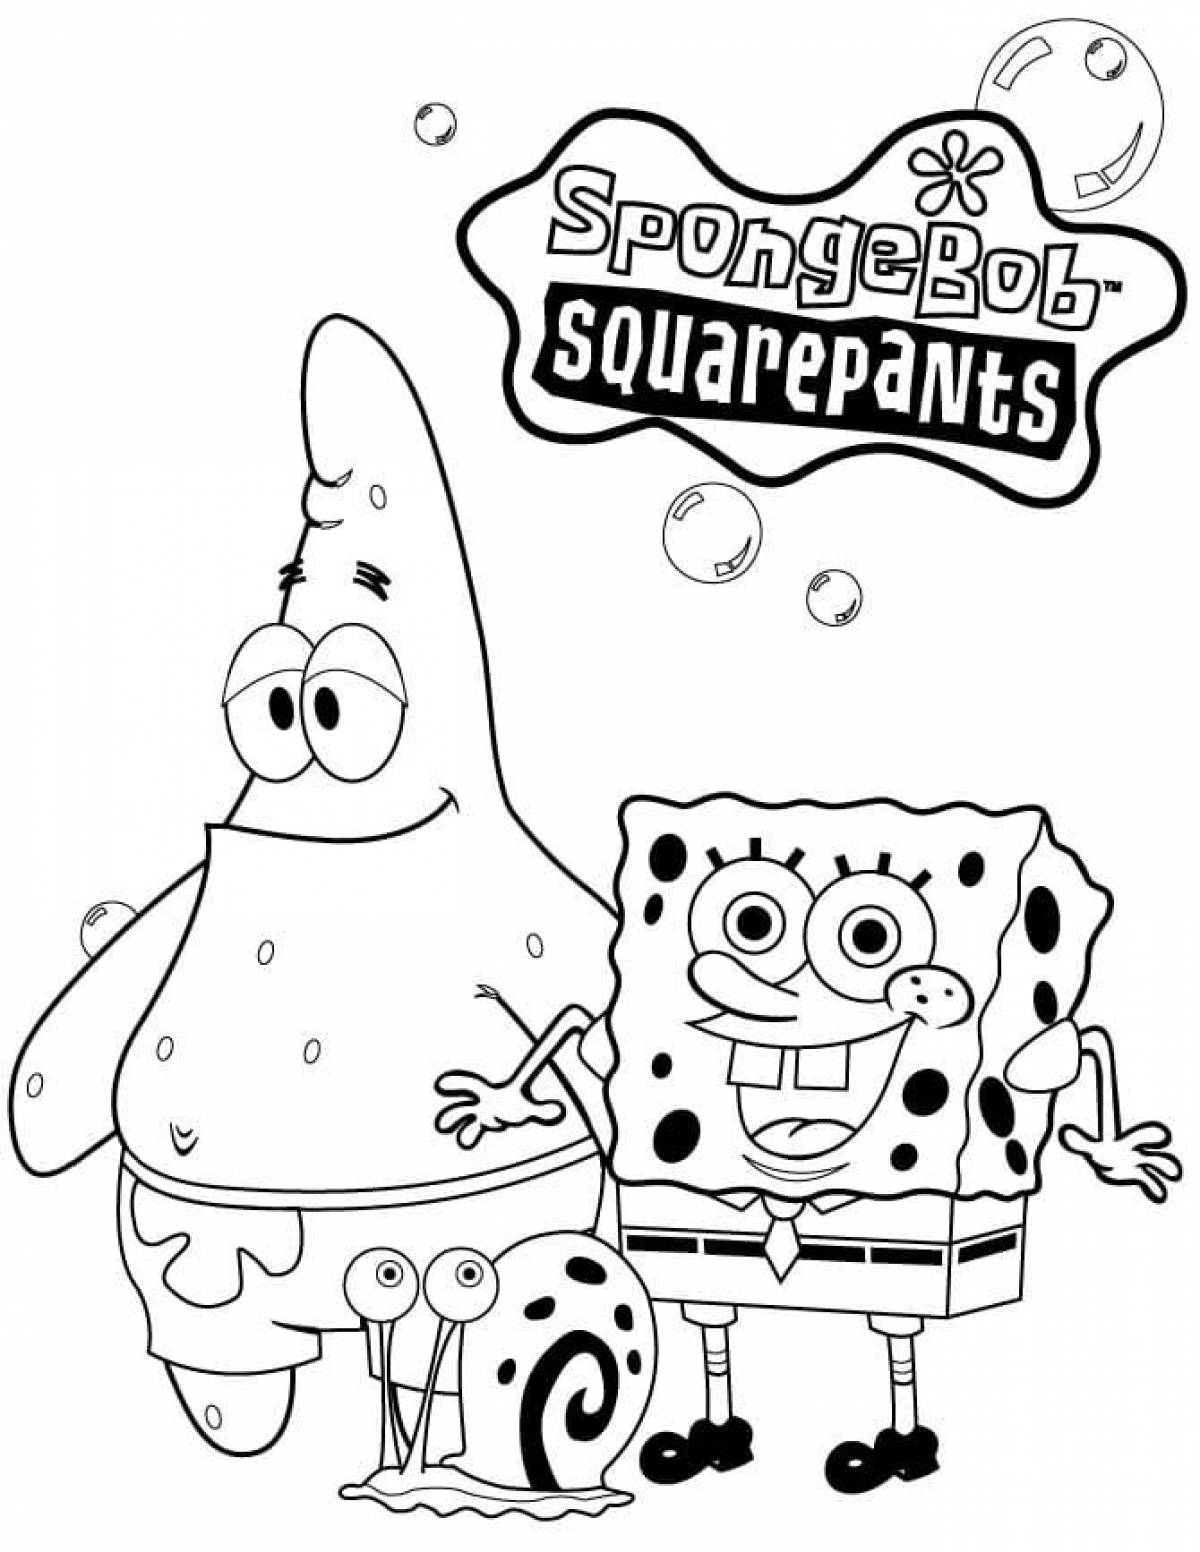 Exciting spongebob and his friends